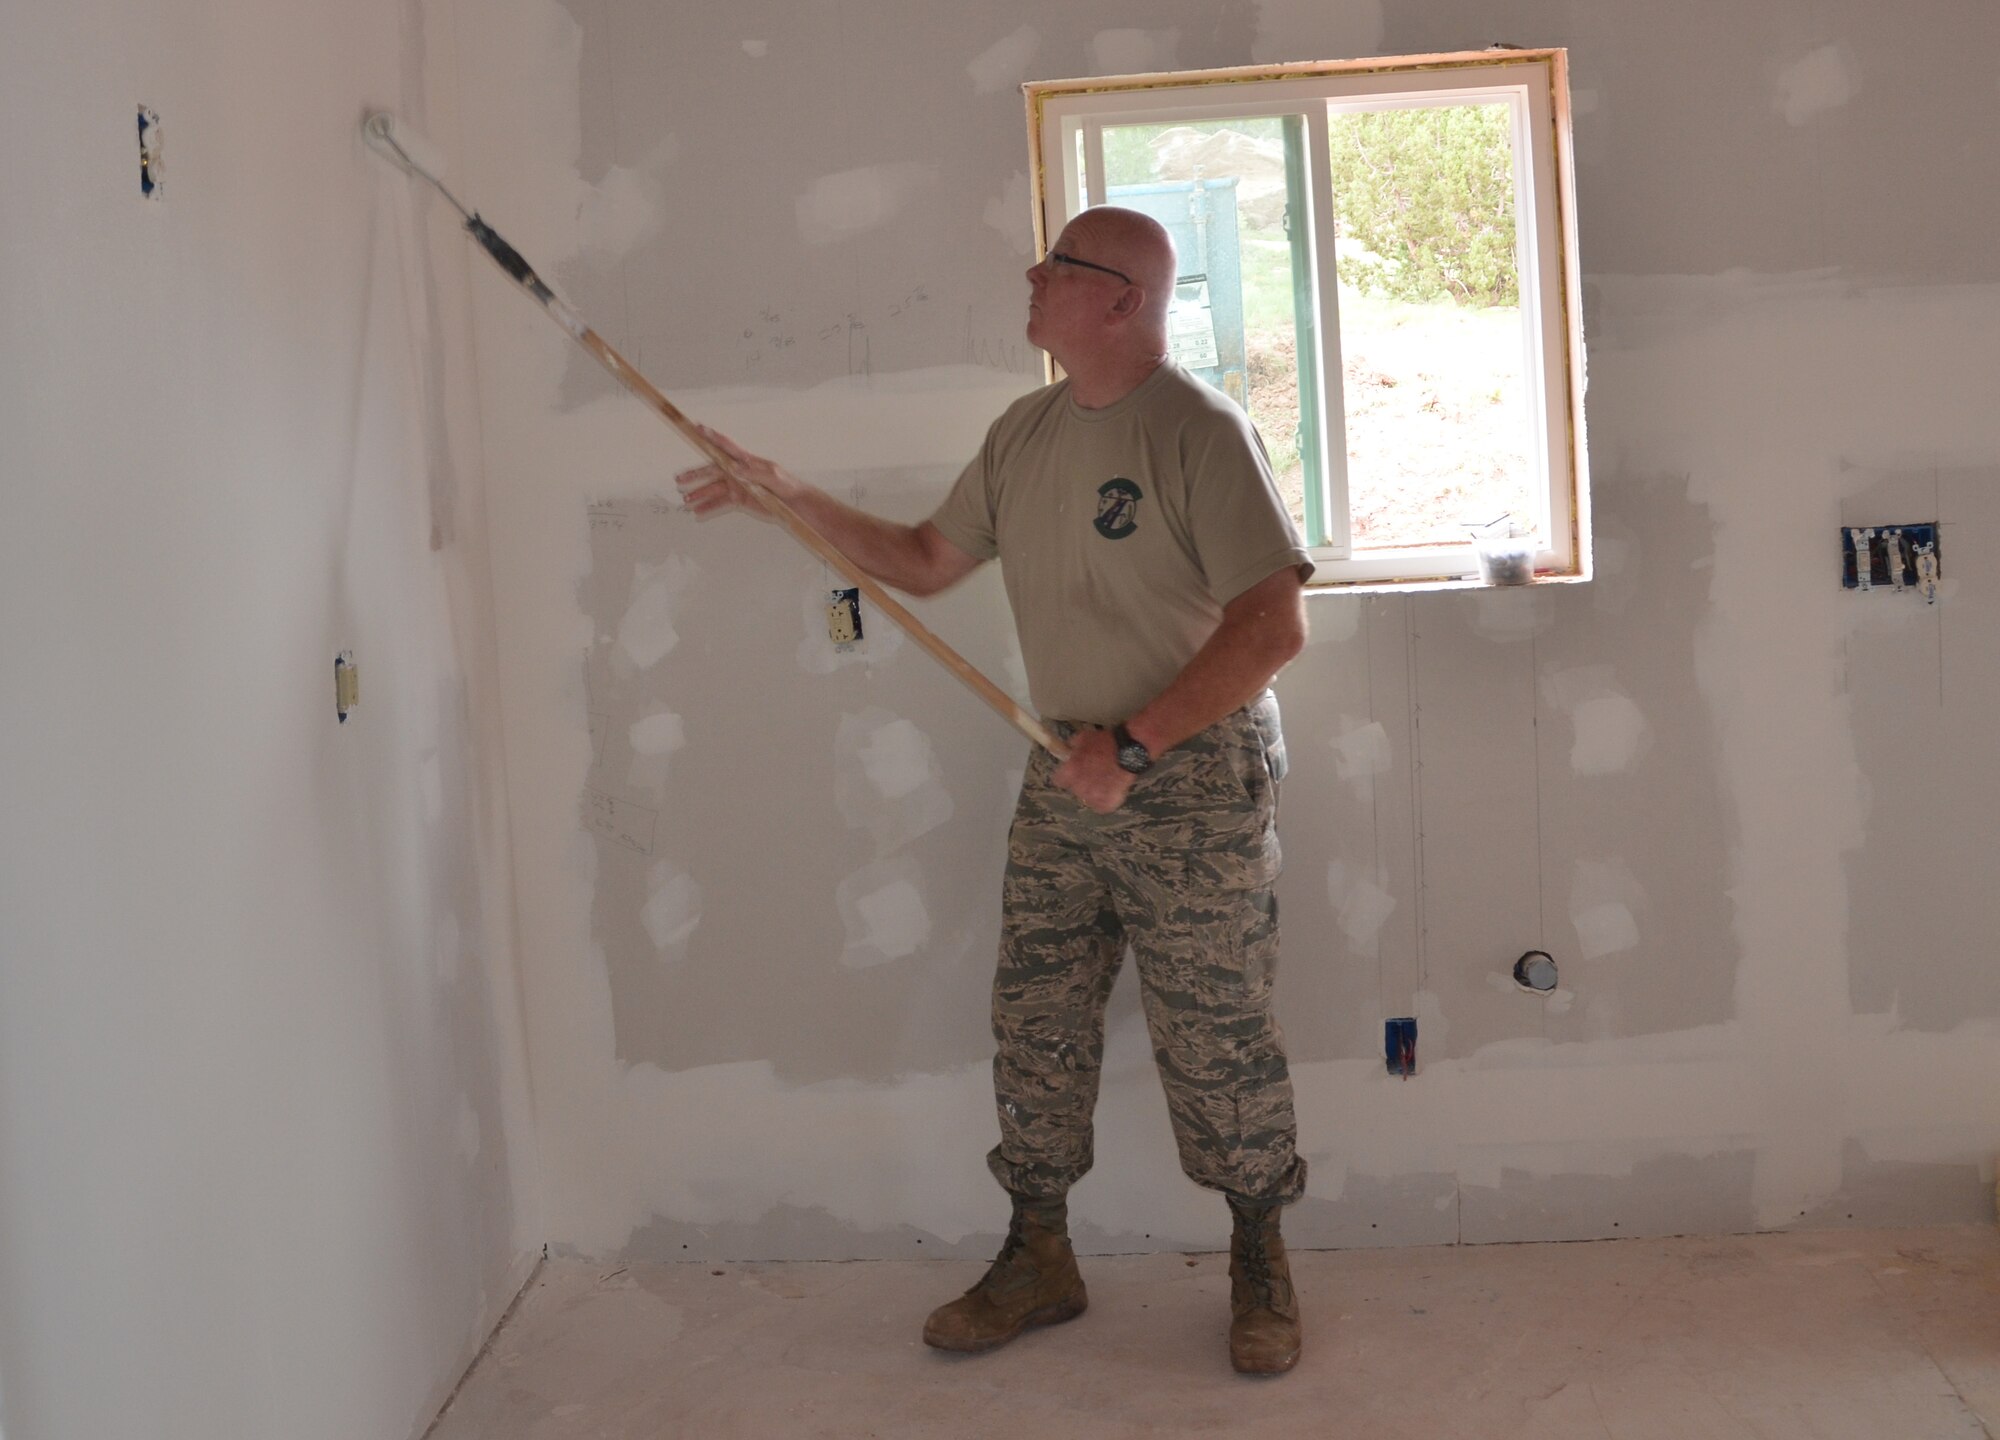 Missouri Air National Guard Chief Master Sgt. John Morrissey, 131st Civil Engineer Squadron superintendent, paints walls at St. Michaels Academy in Window Rock, Ariz., Aug. 8, 2013. The 131st CES crew members developed a sense of pride and joy in, and were appreciated for, their hard work, dedication and selflessness. (U.S. Air Force photo/Released)

